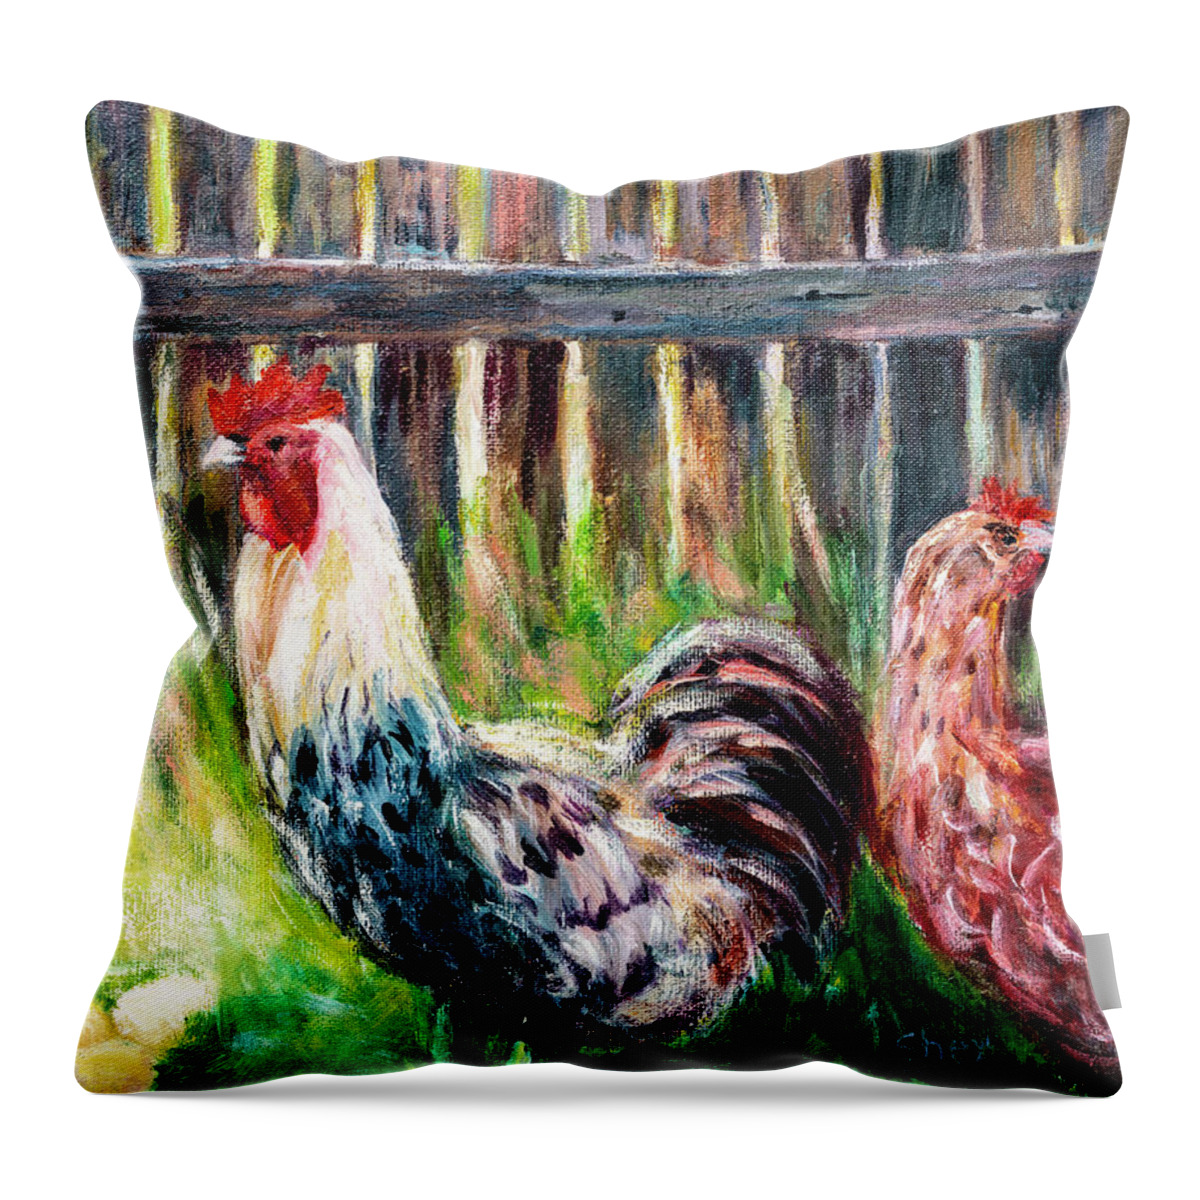 Art - Acrylic Throw Pillow featuring the painting Farm Yard Chicken - Acrylic Art by Sher Nasser